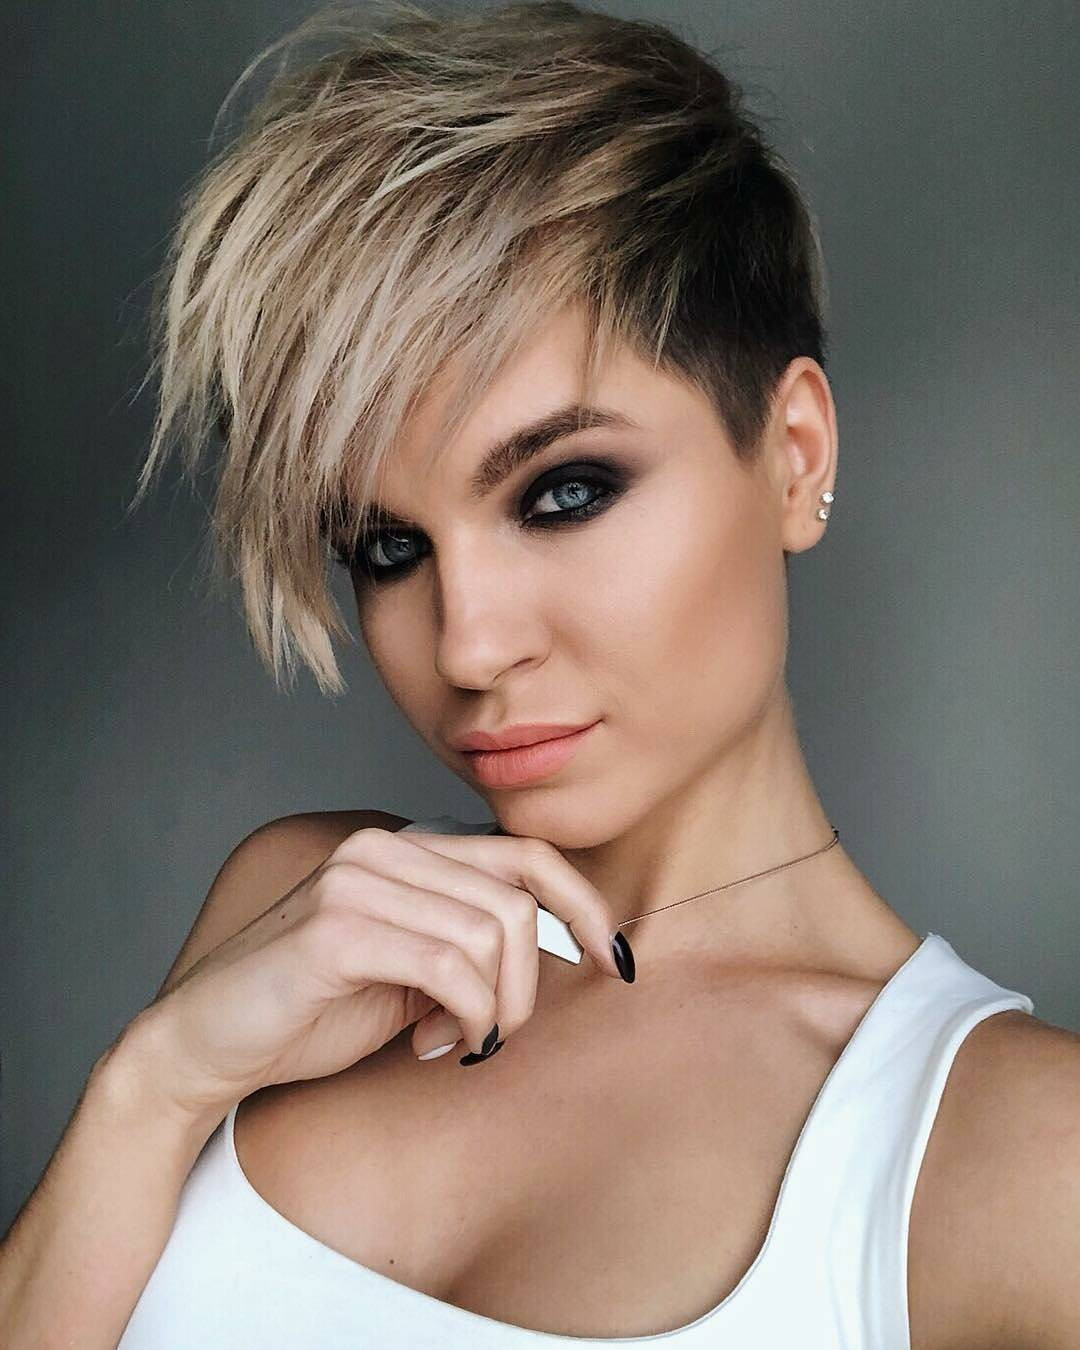 Girls Short Haircuts 2019
 10 New Short Hairstyles For Thick Hair In 2018